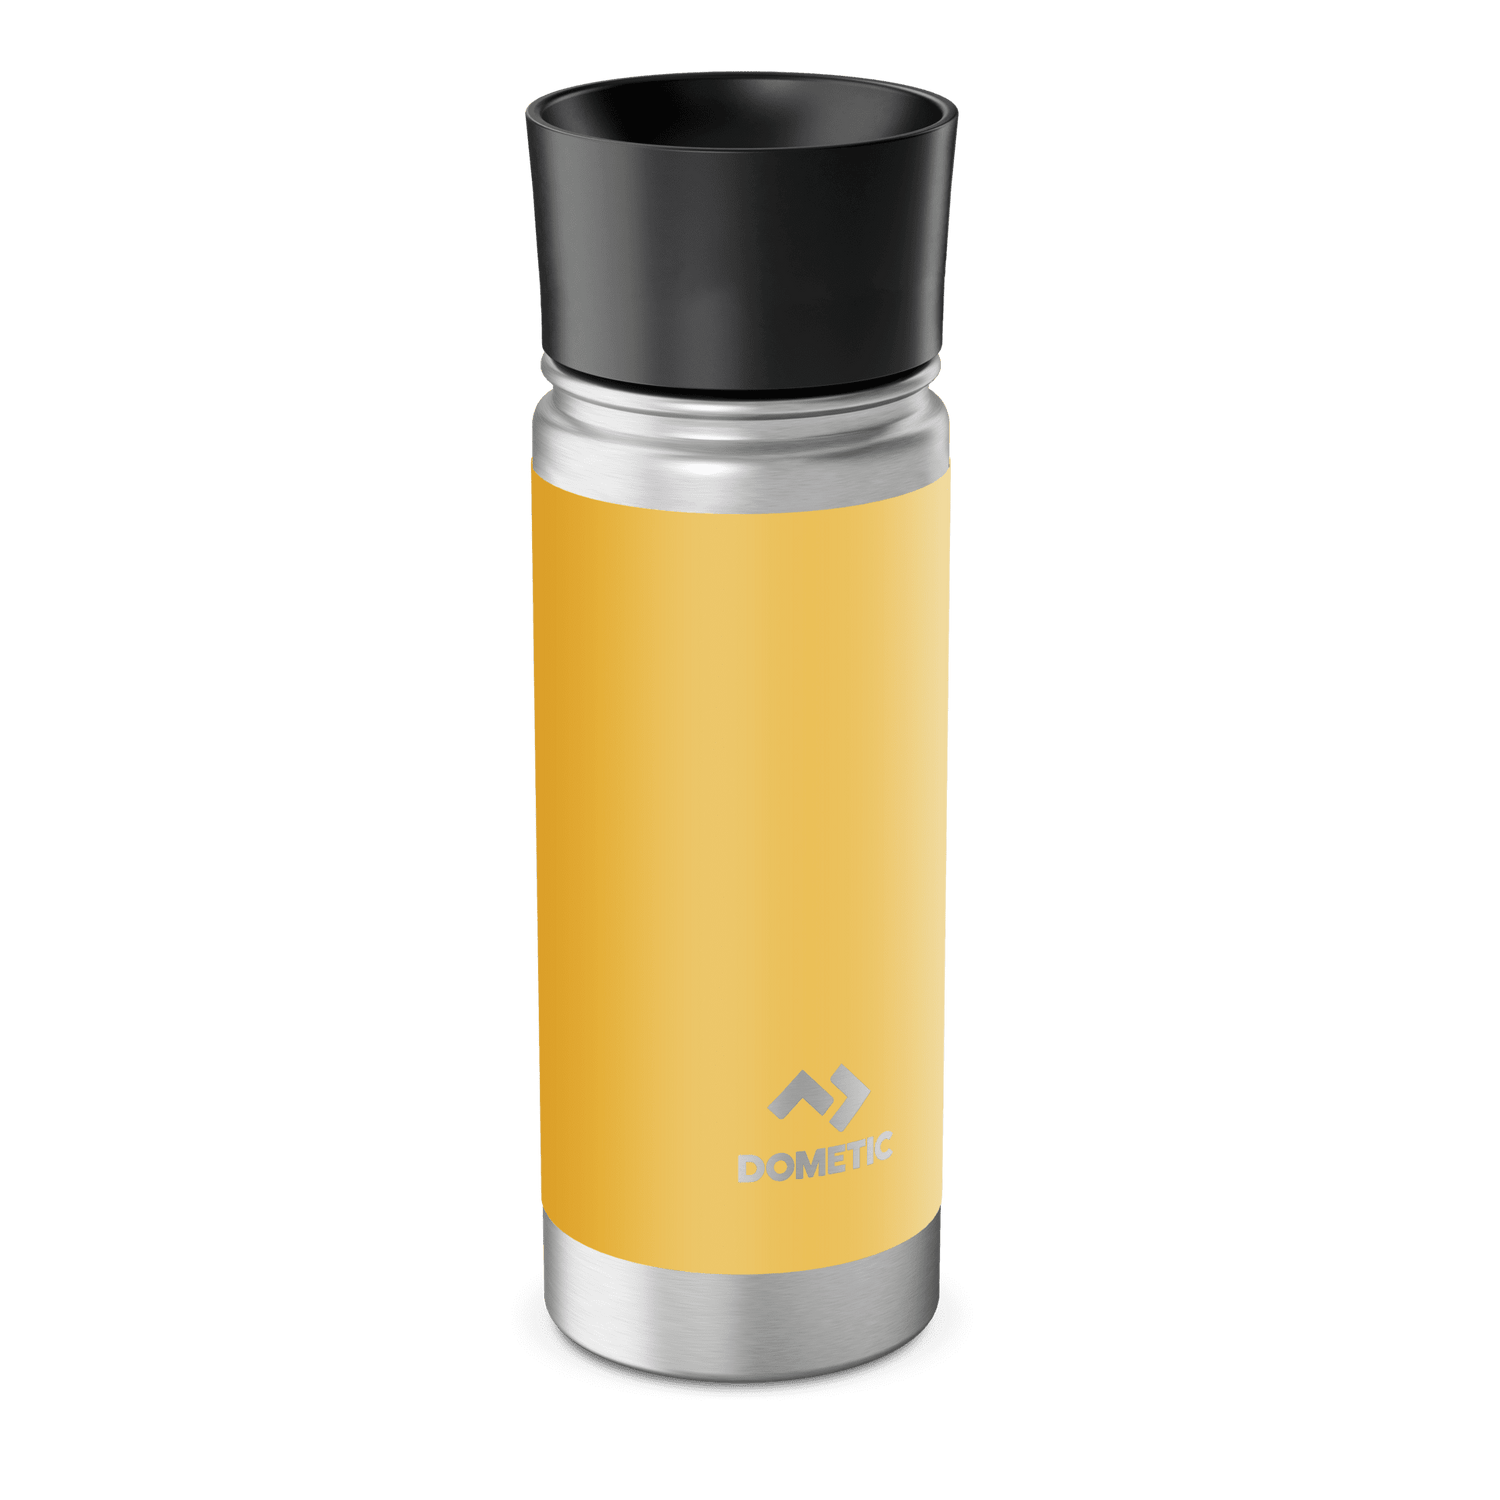 Dometic Thermo Bottle 500mL - Glow